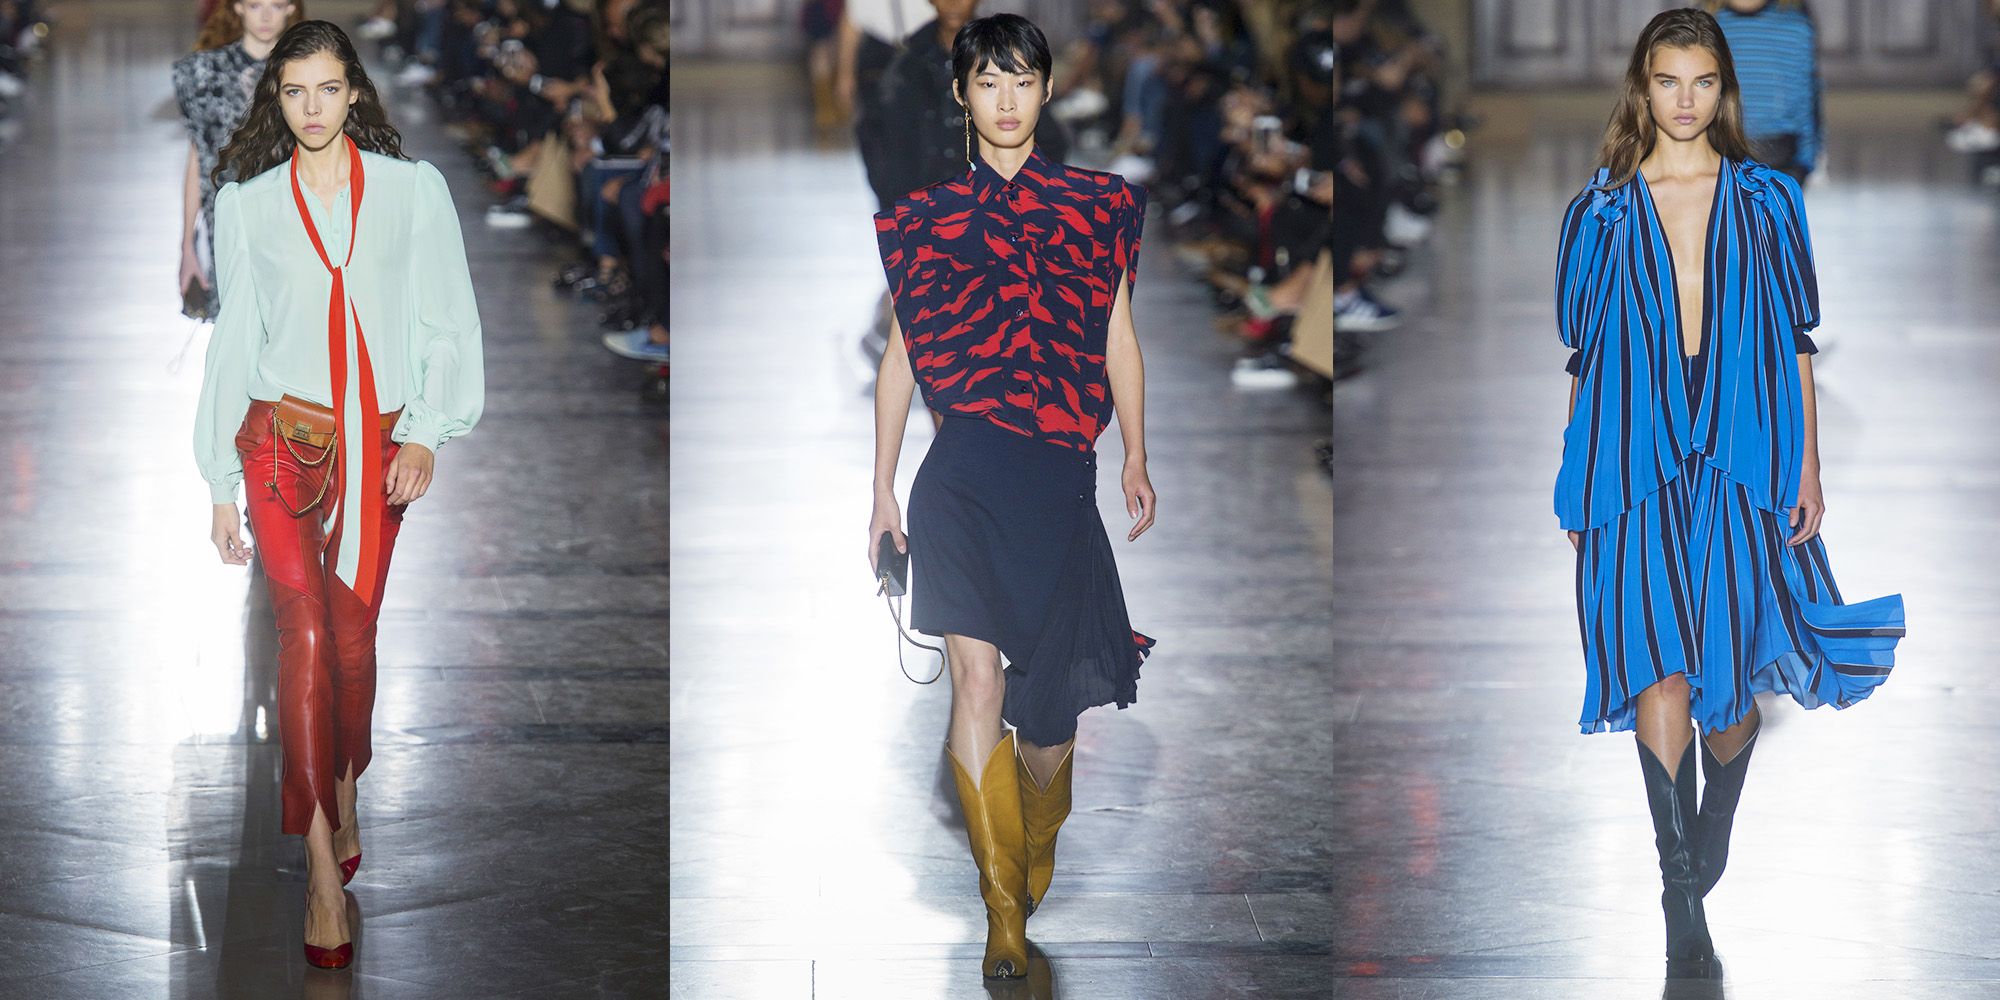 Givenchy Collections - Givenchy Runway 